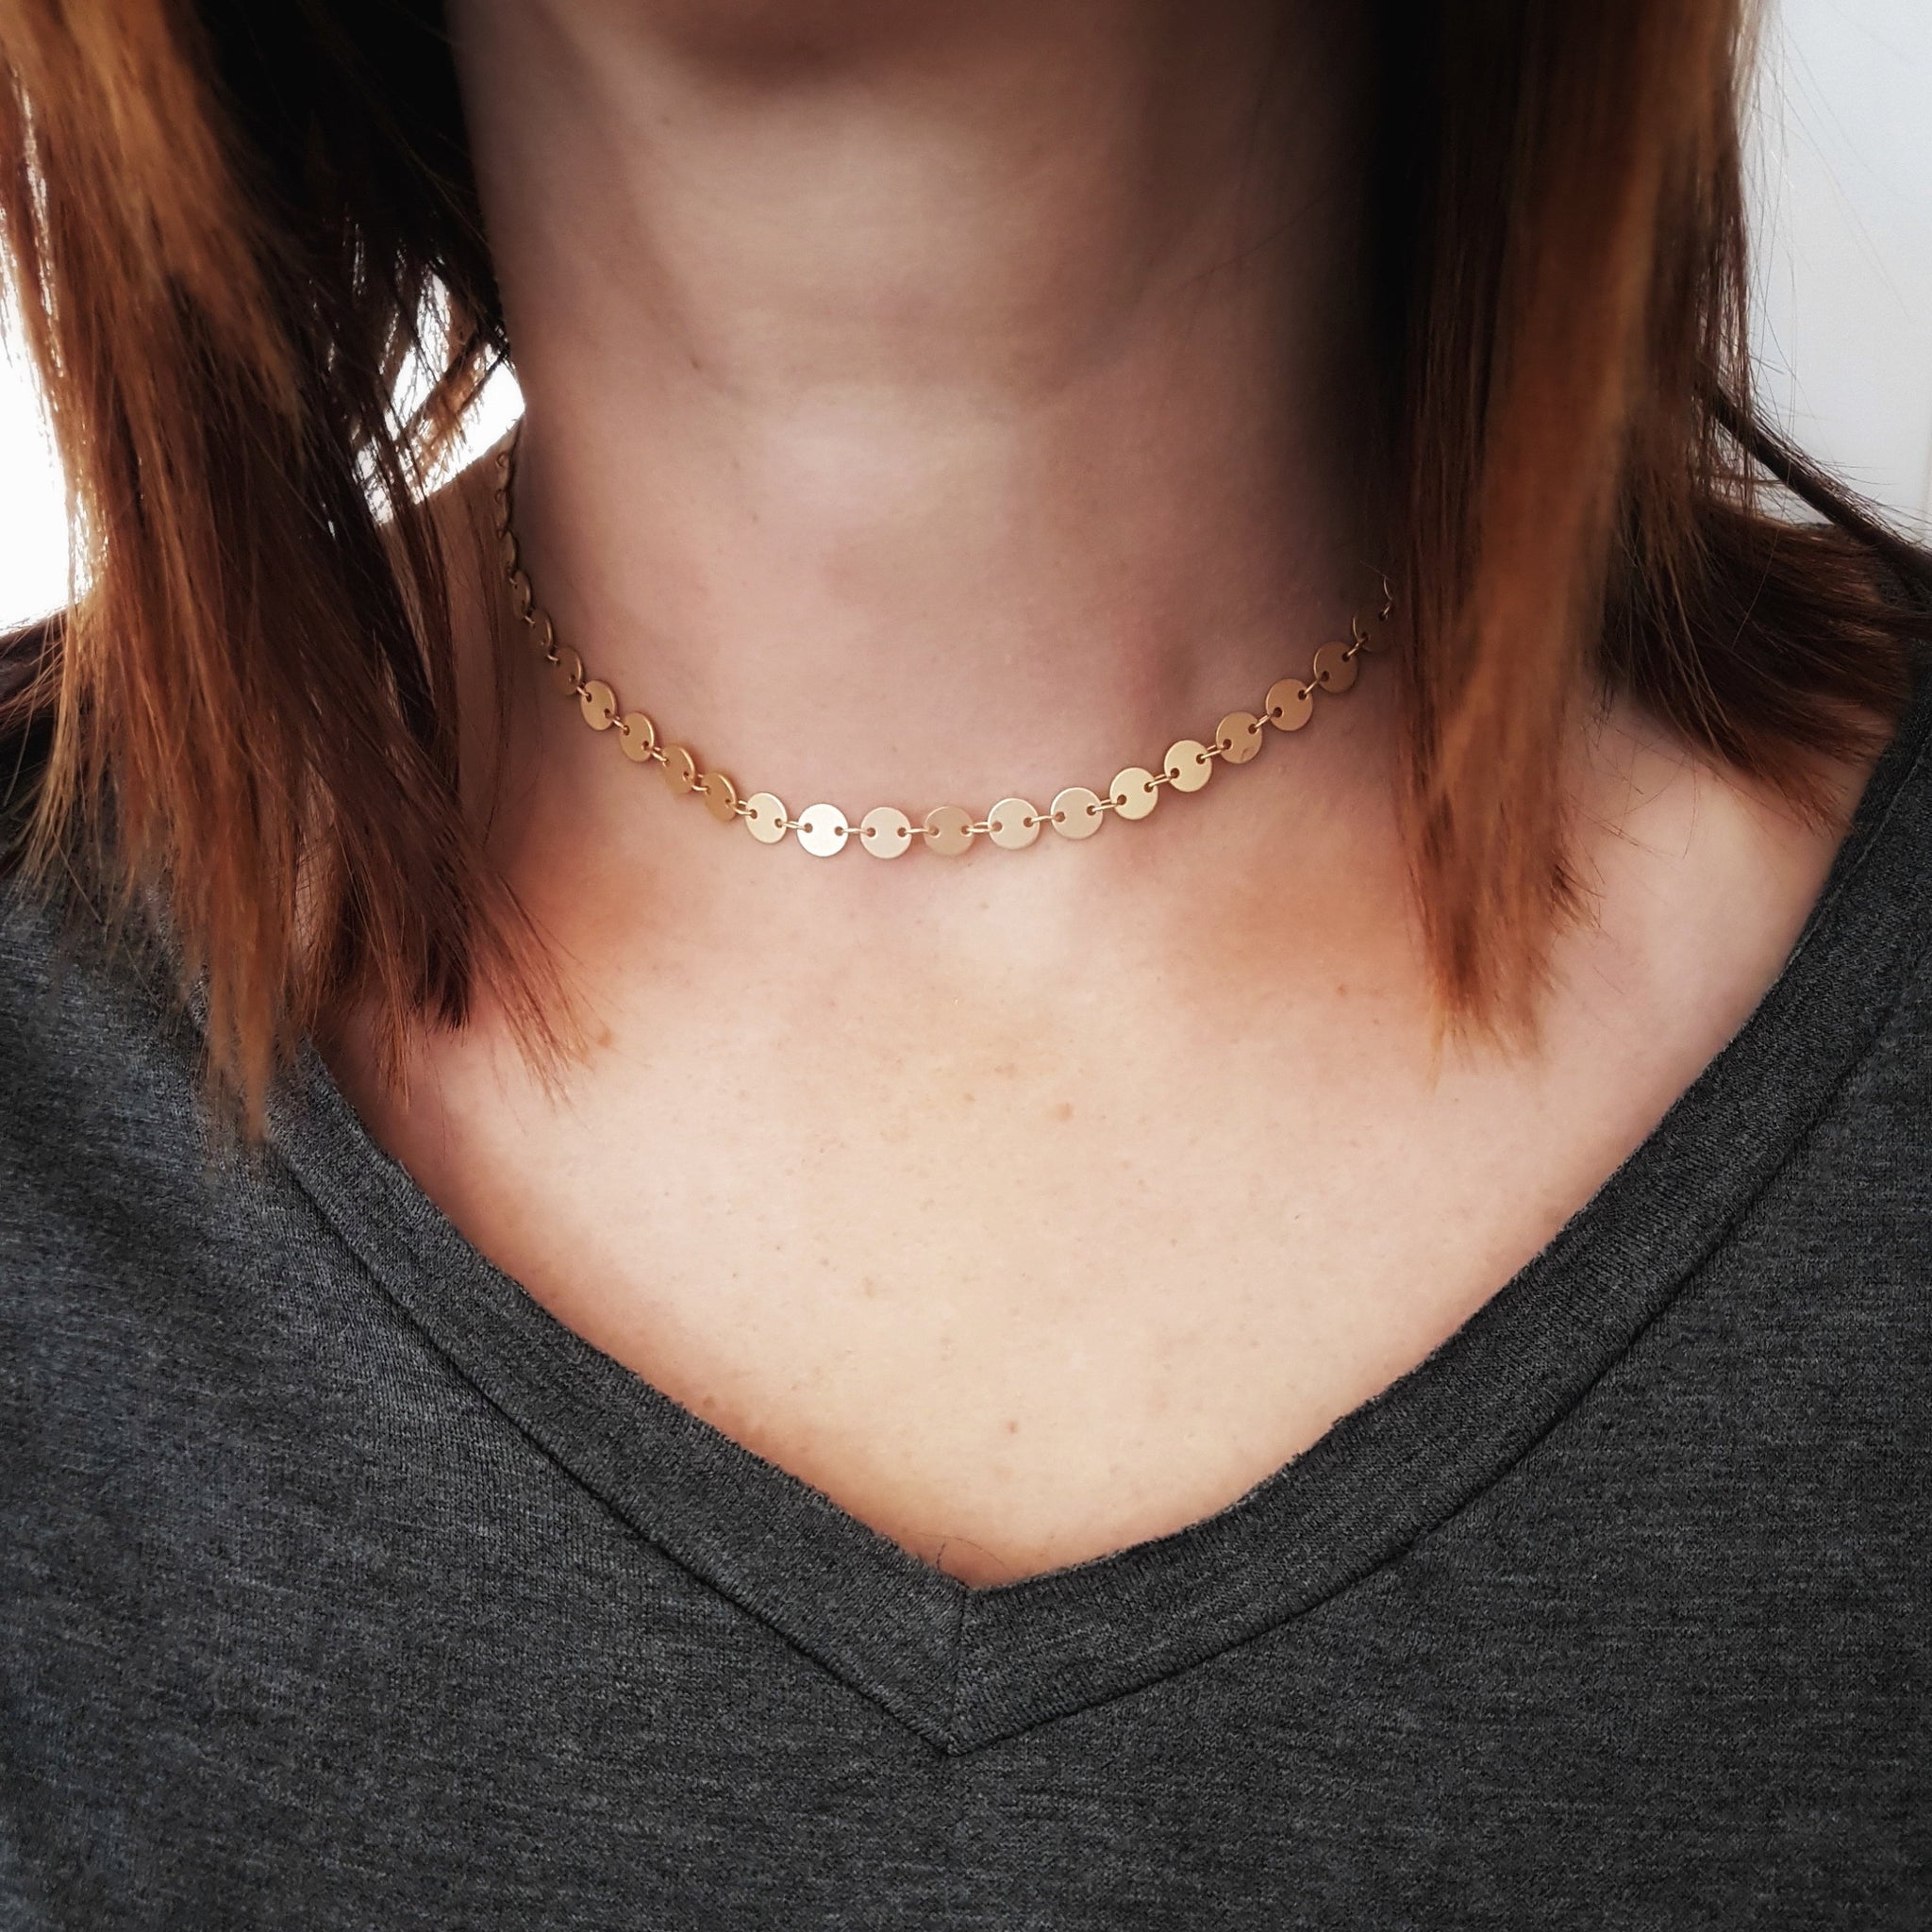 Gold Coin Choker Matte Gold Disc Choker  Gold Coin Necklace Gold Statement Choker Tattoo Choker Bridesmaid Necklace Bohemian Necklace - Gwen Delicious Jewelry Designs